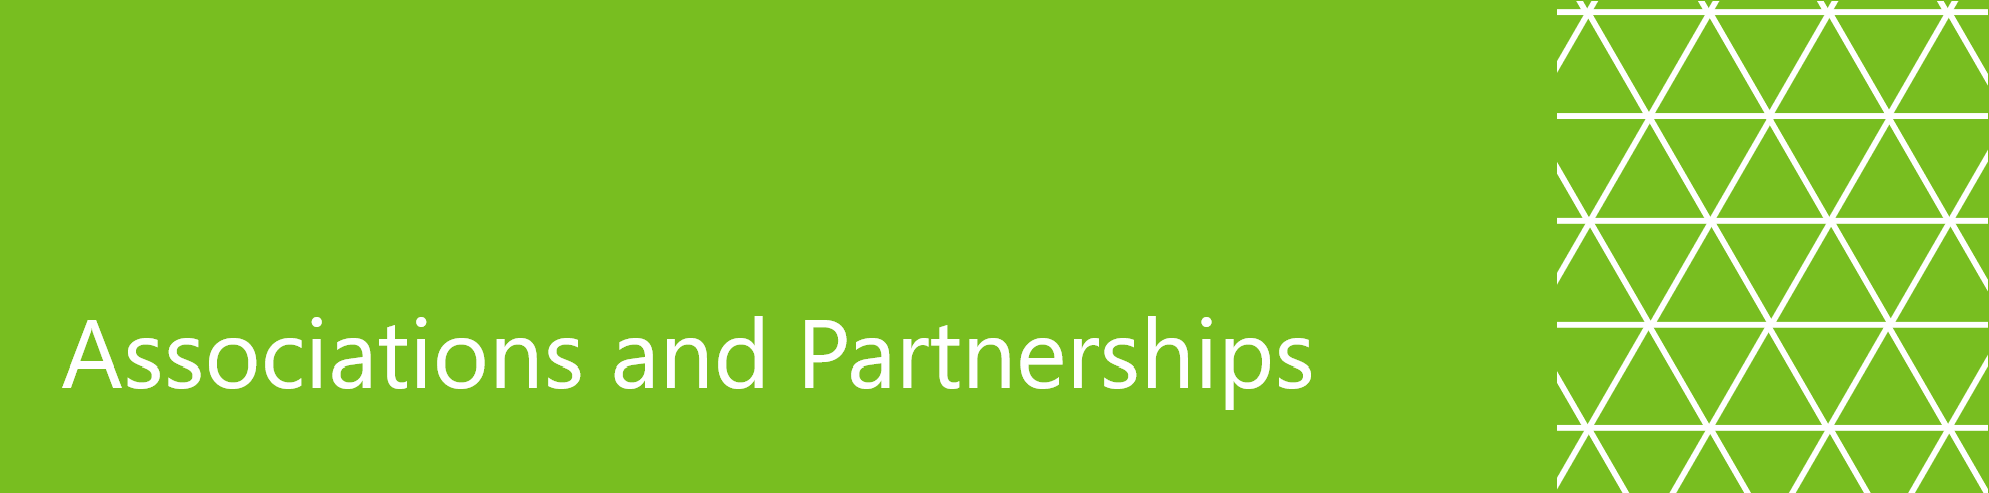 Associations and Partnerships